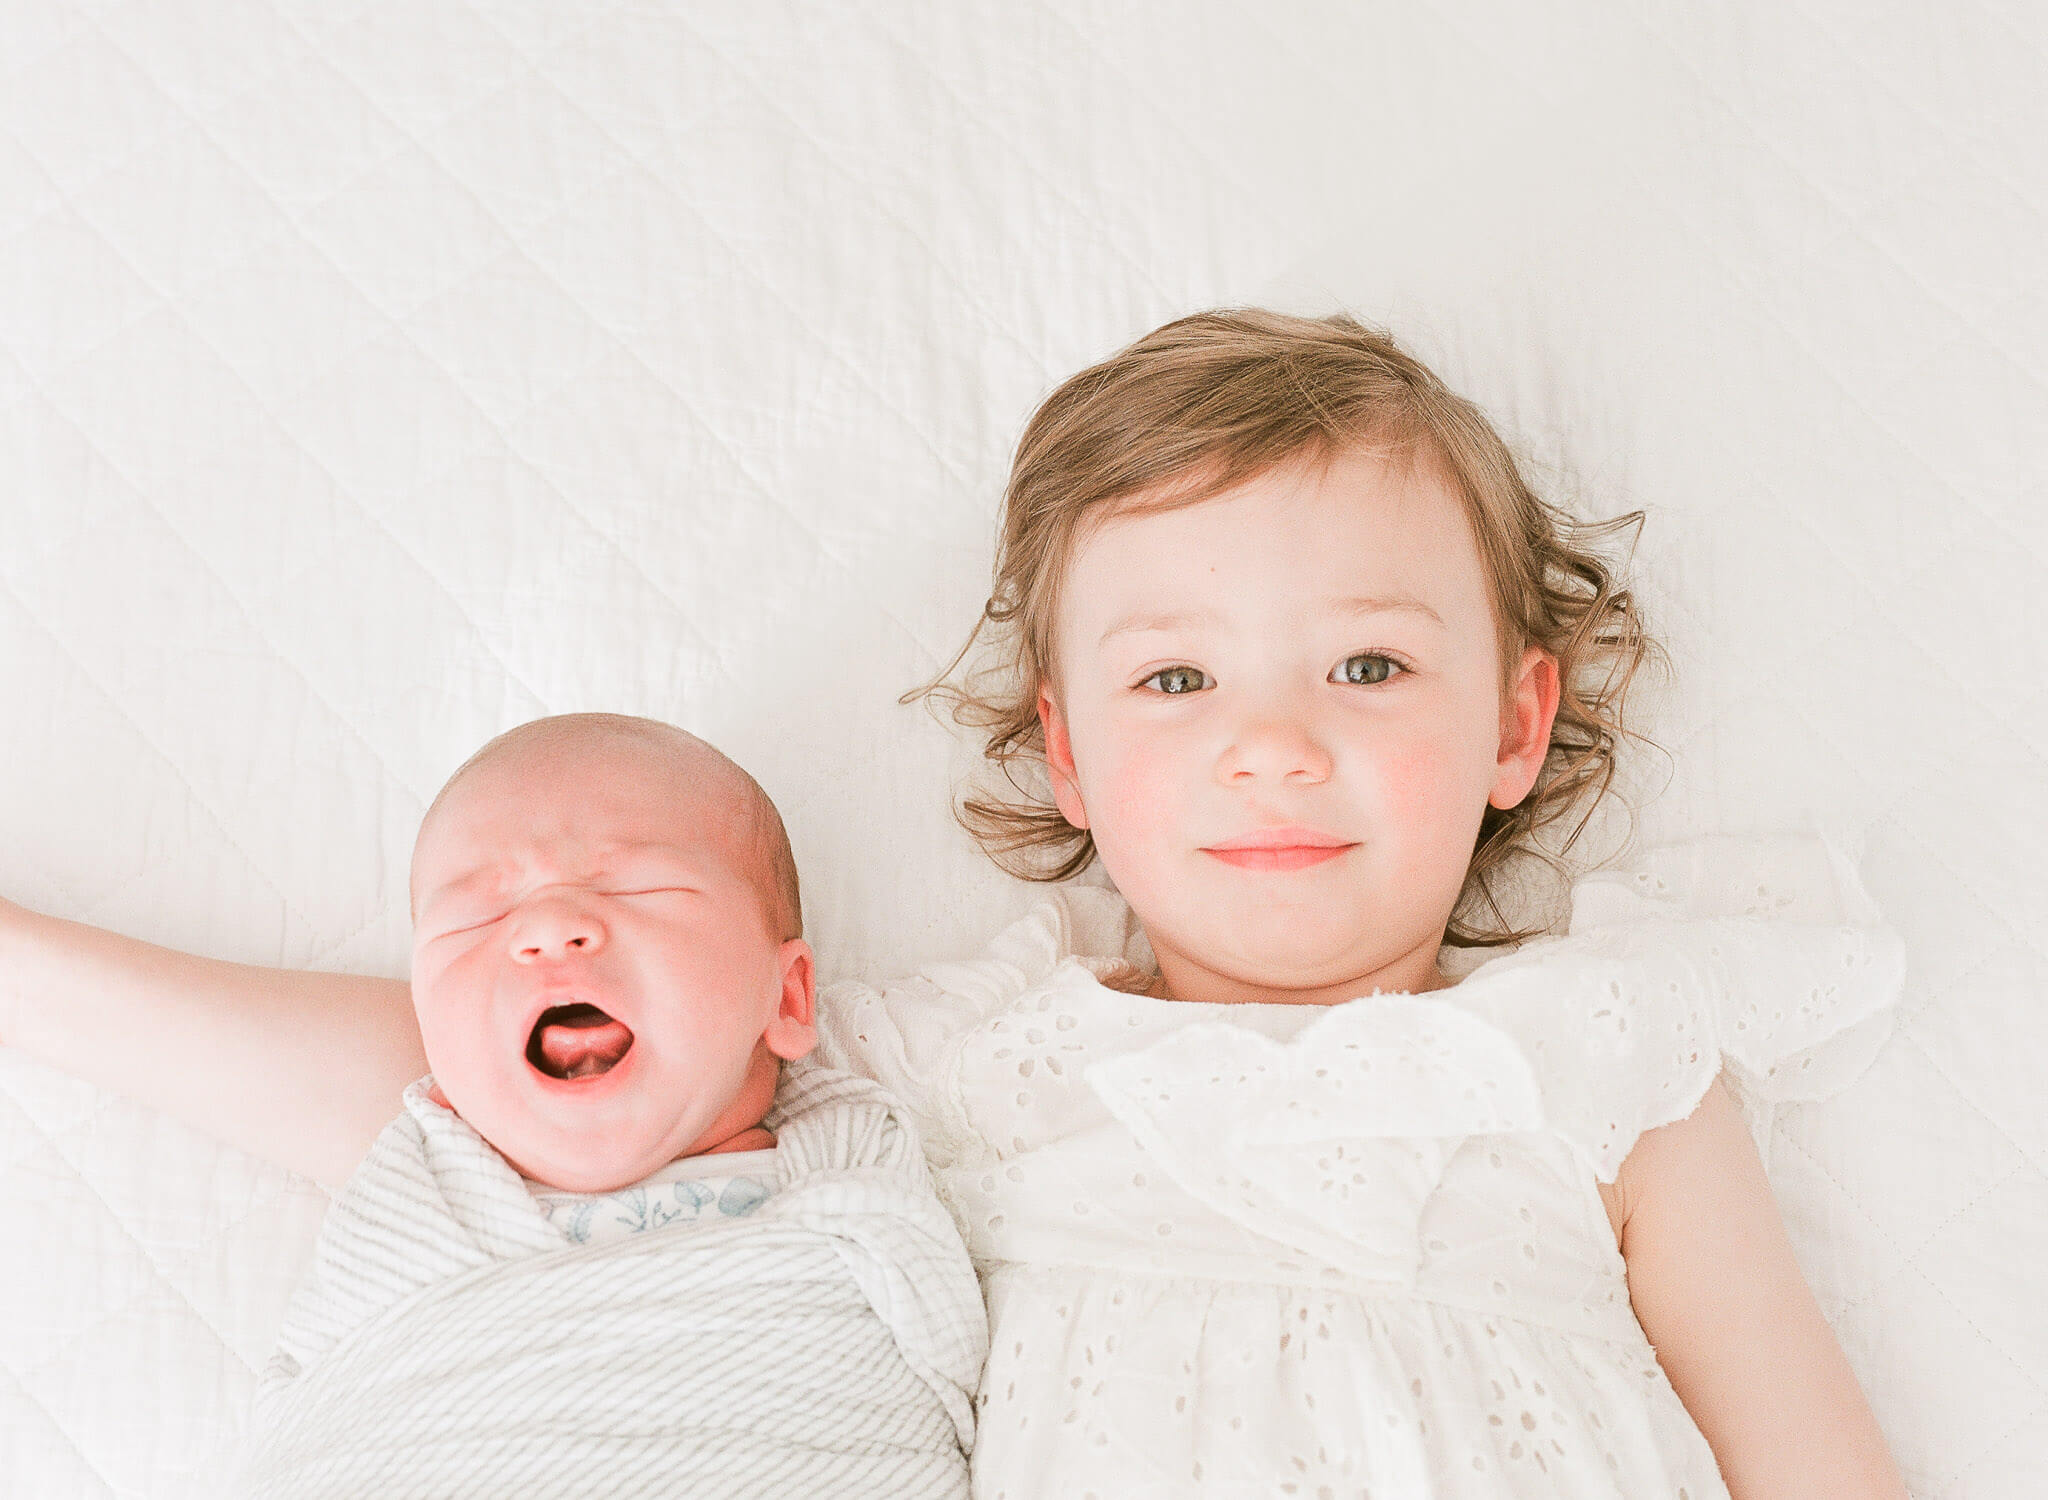 5 Easy Ways You can Prepare for Newborn Photos at Home